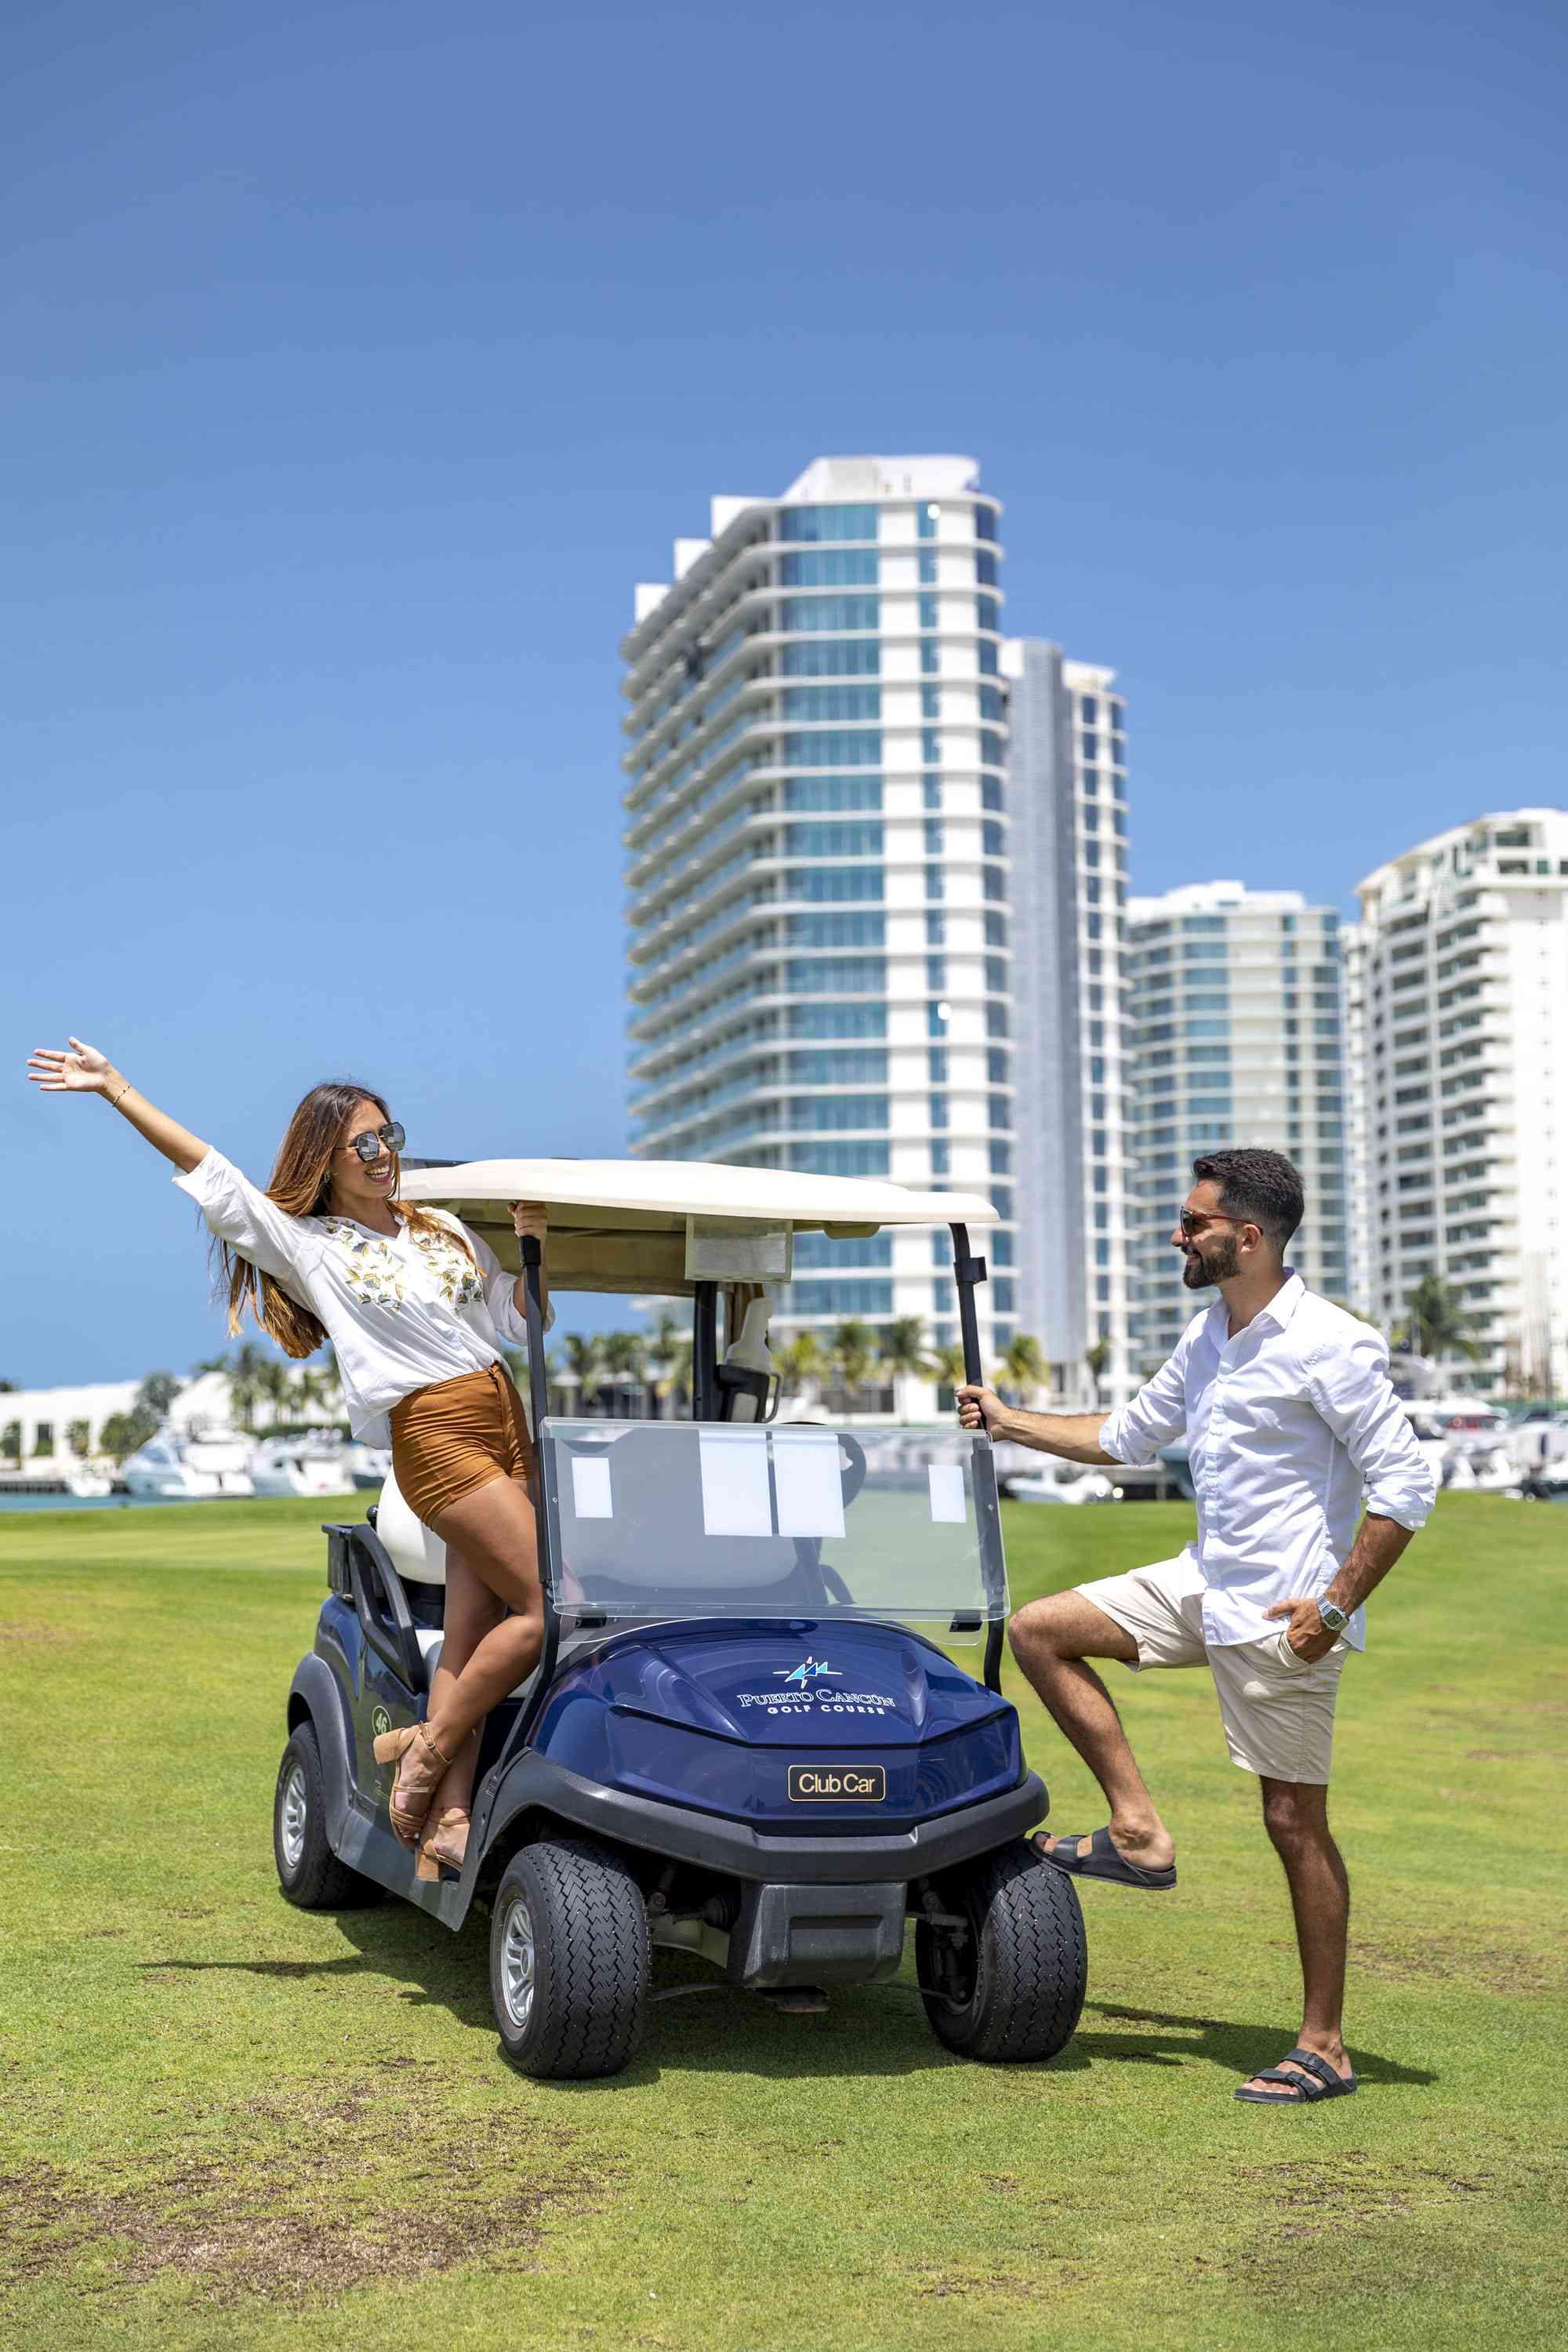 A man and a woman posing on a golf cart